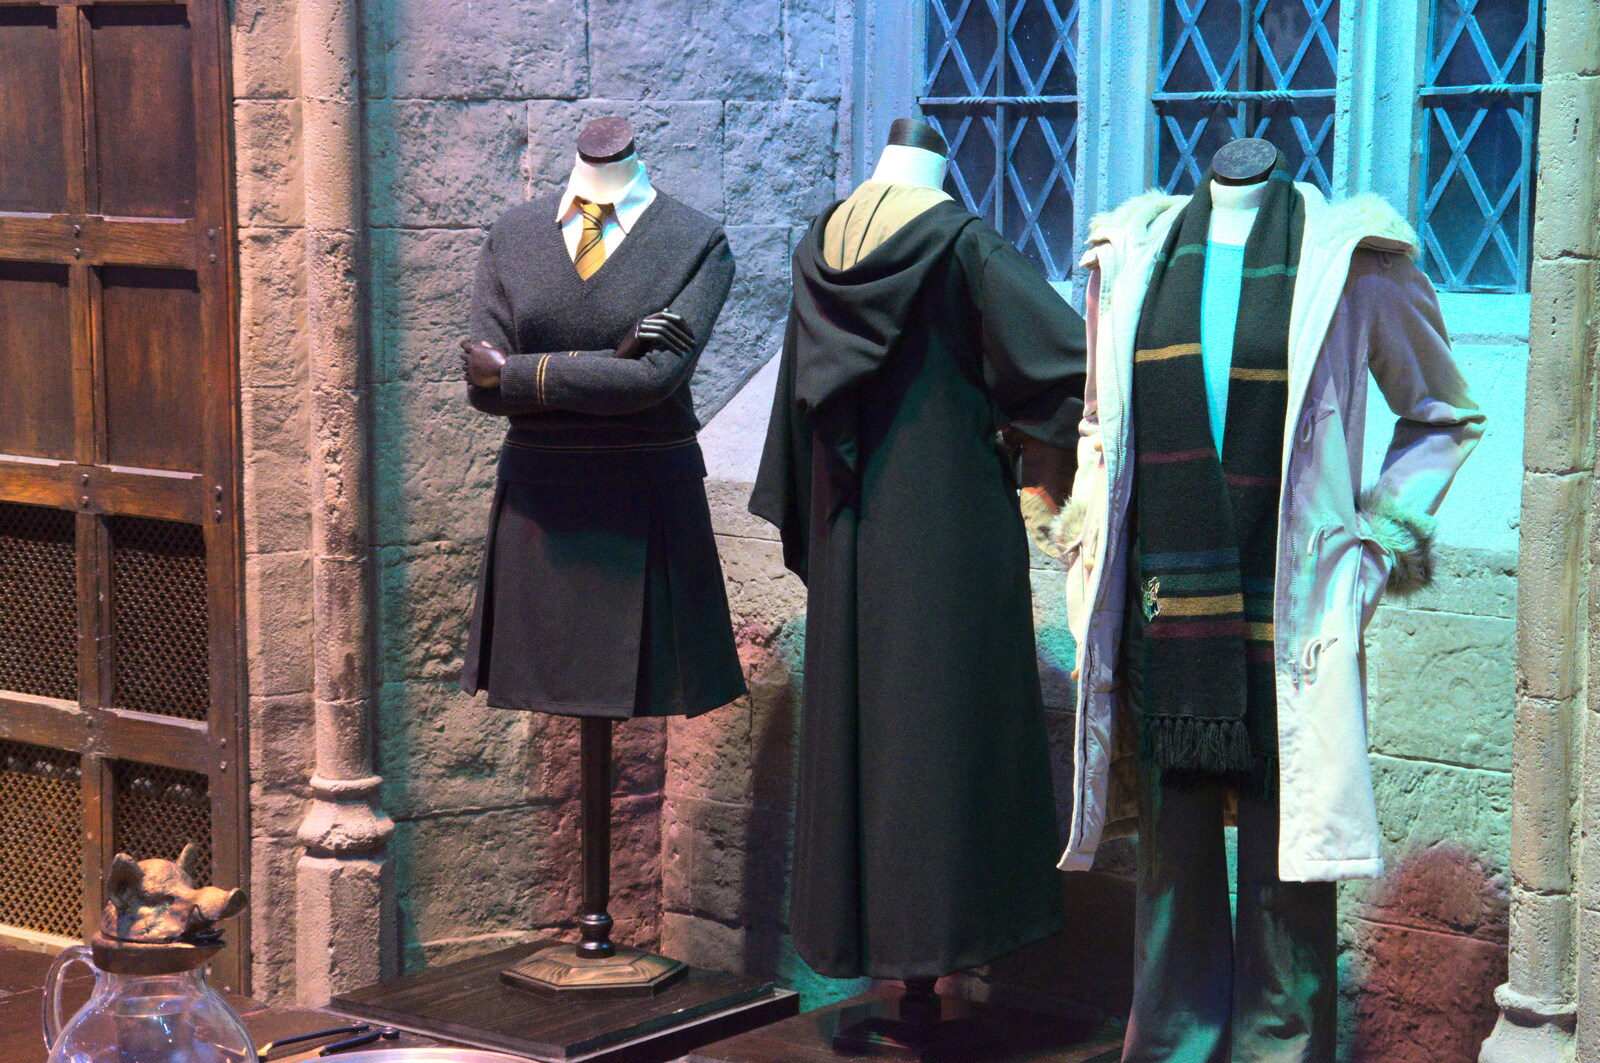 Some of the film costumes on display from A Trip to Harry Potter World, Leavesden, Hertfordshire - 16th February 2020